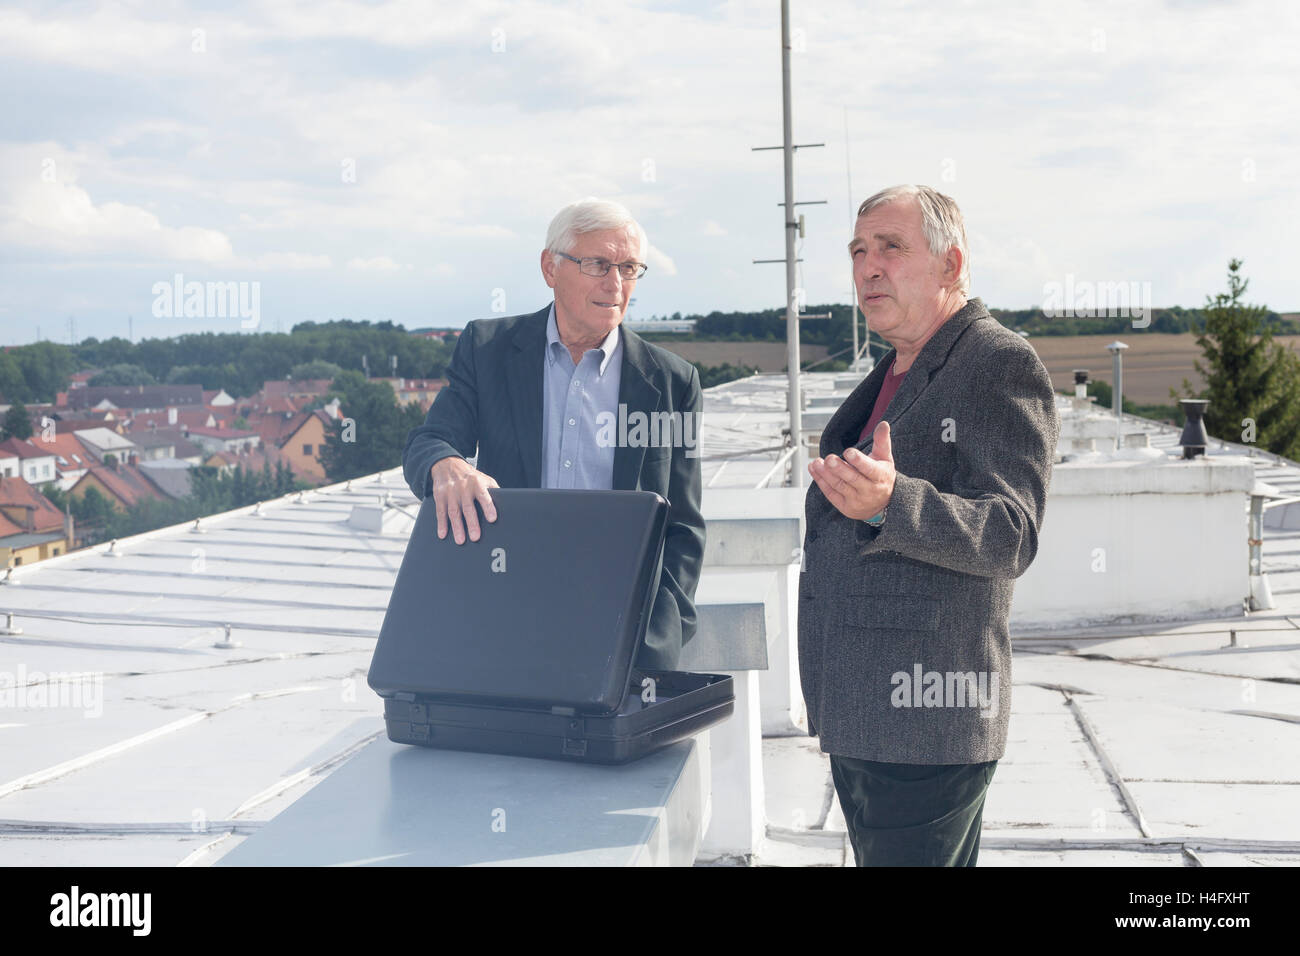 Two senior businessmen with briefcase discussing business deal outdoors on the roof of a building. Stock Photo